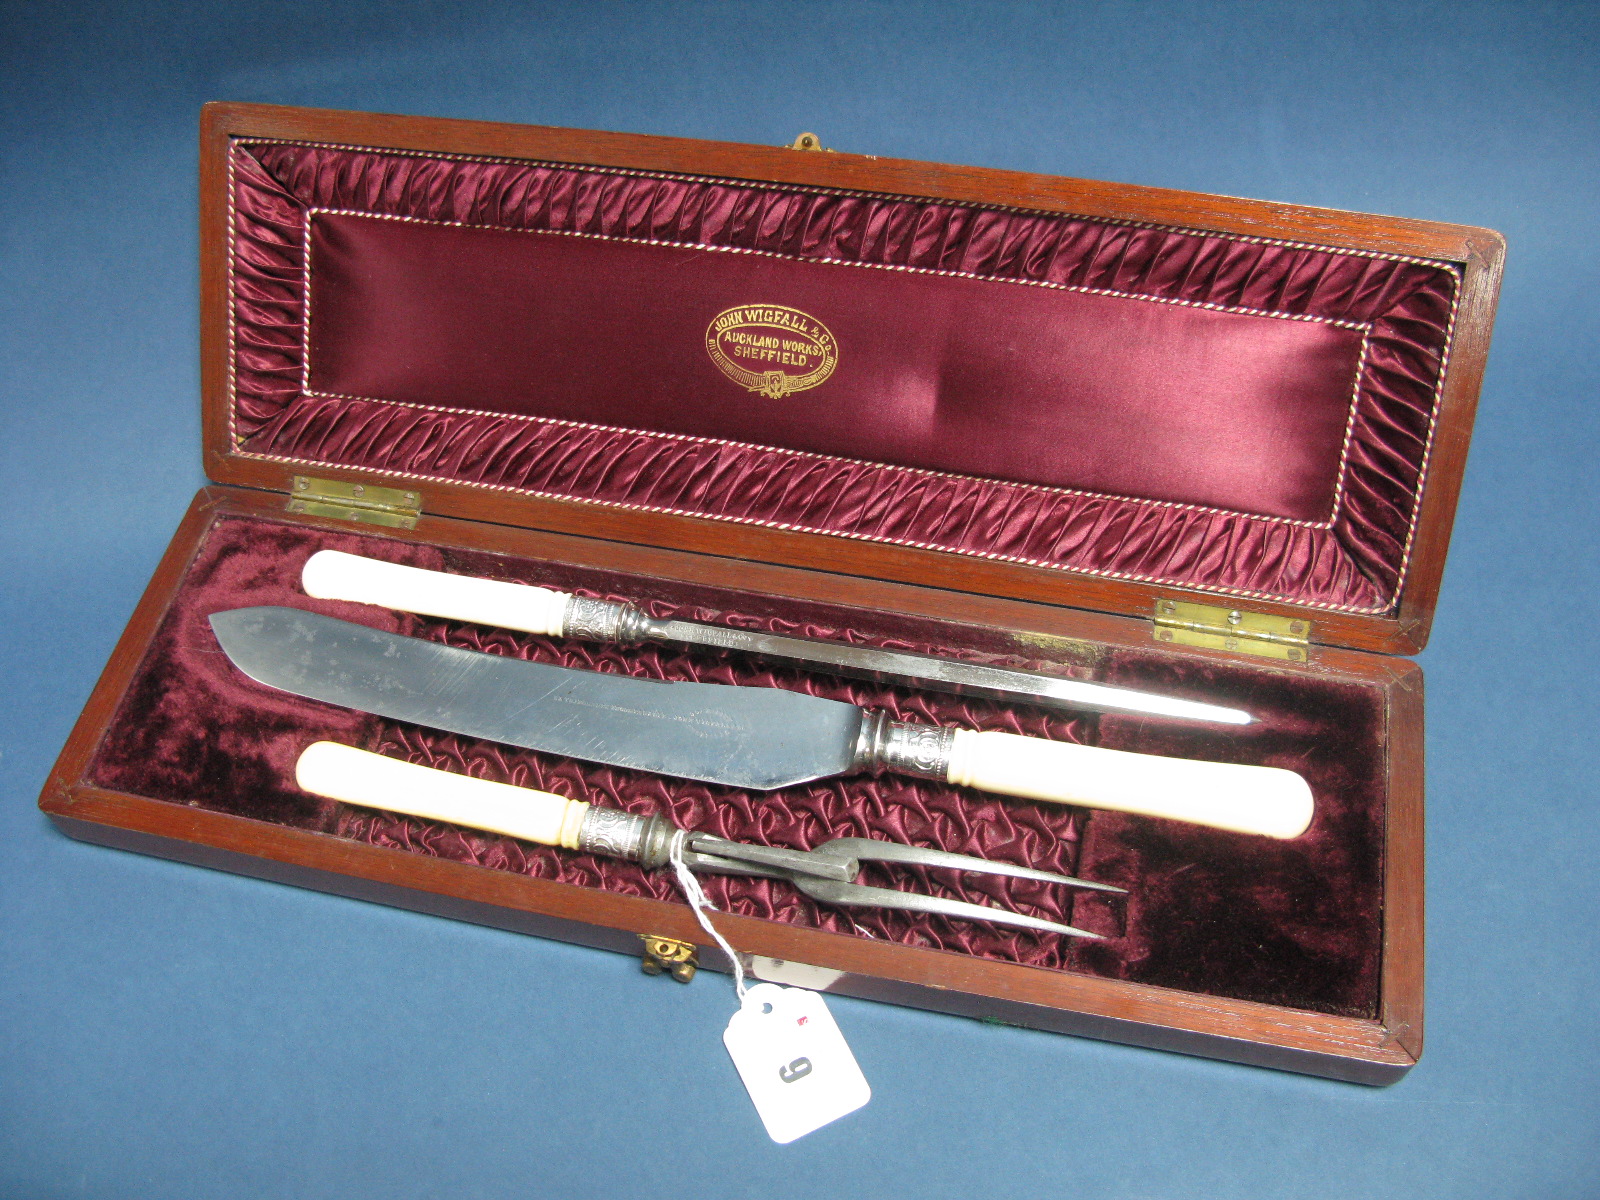 A XIX Century John Wigfall & Co Three Piece Carving Set, in original fitted wooden case, with